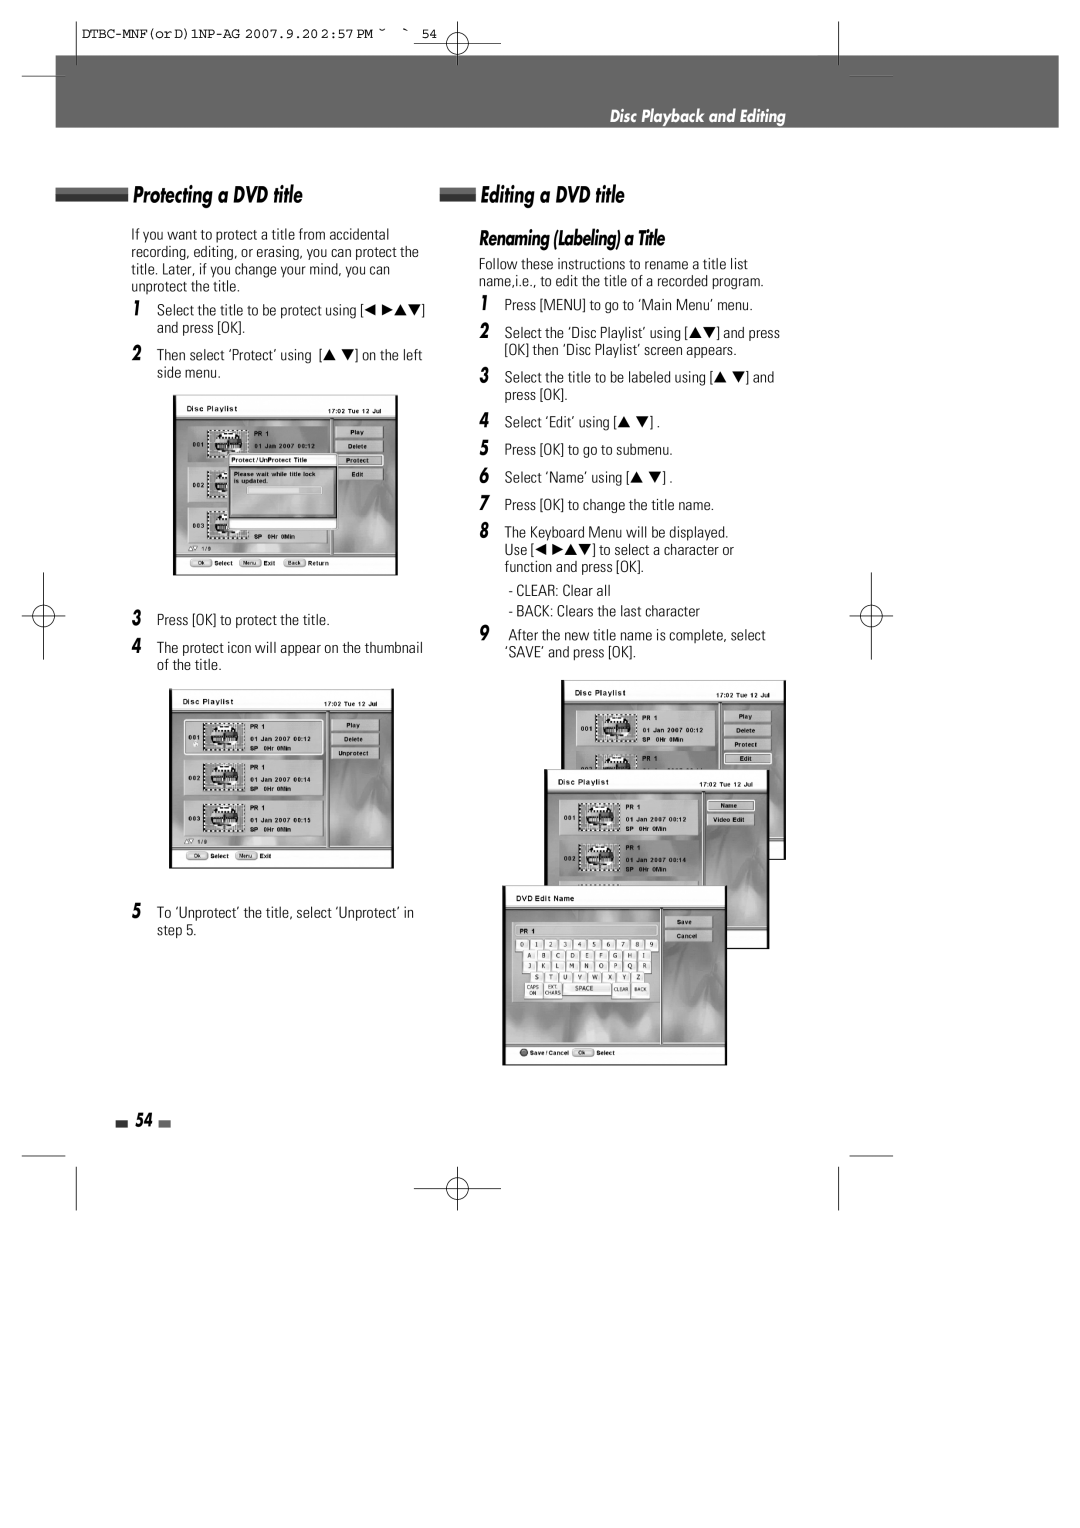 Daewoo DRVT-43, DRVT-40 instruction manual Protecting a DVD title, Renaming Labeling a Title, Disc Playback and Editing 